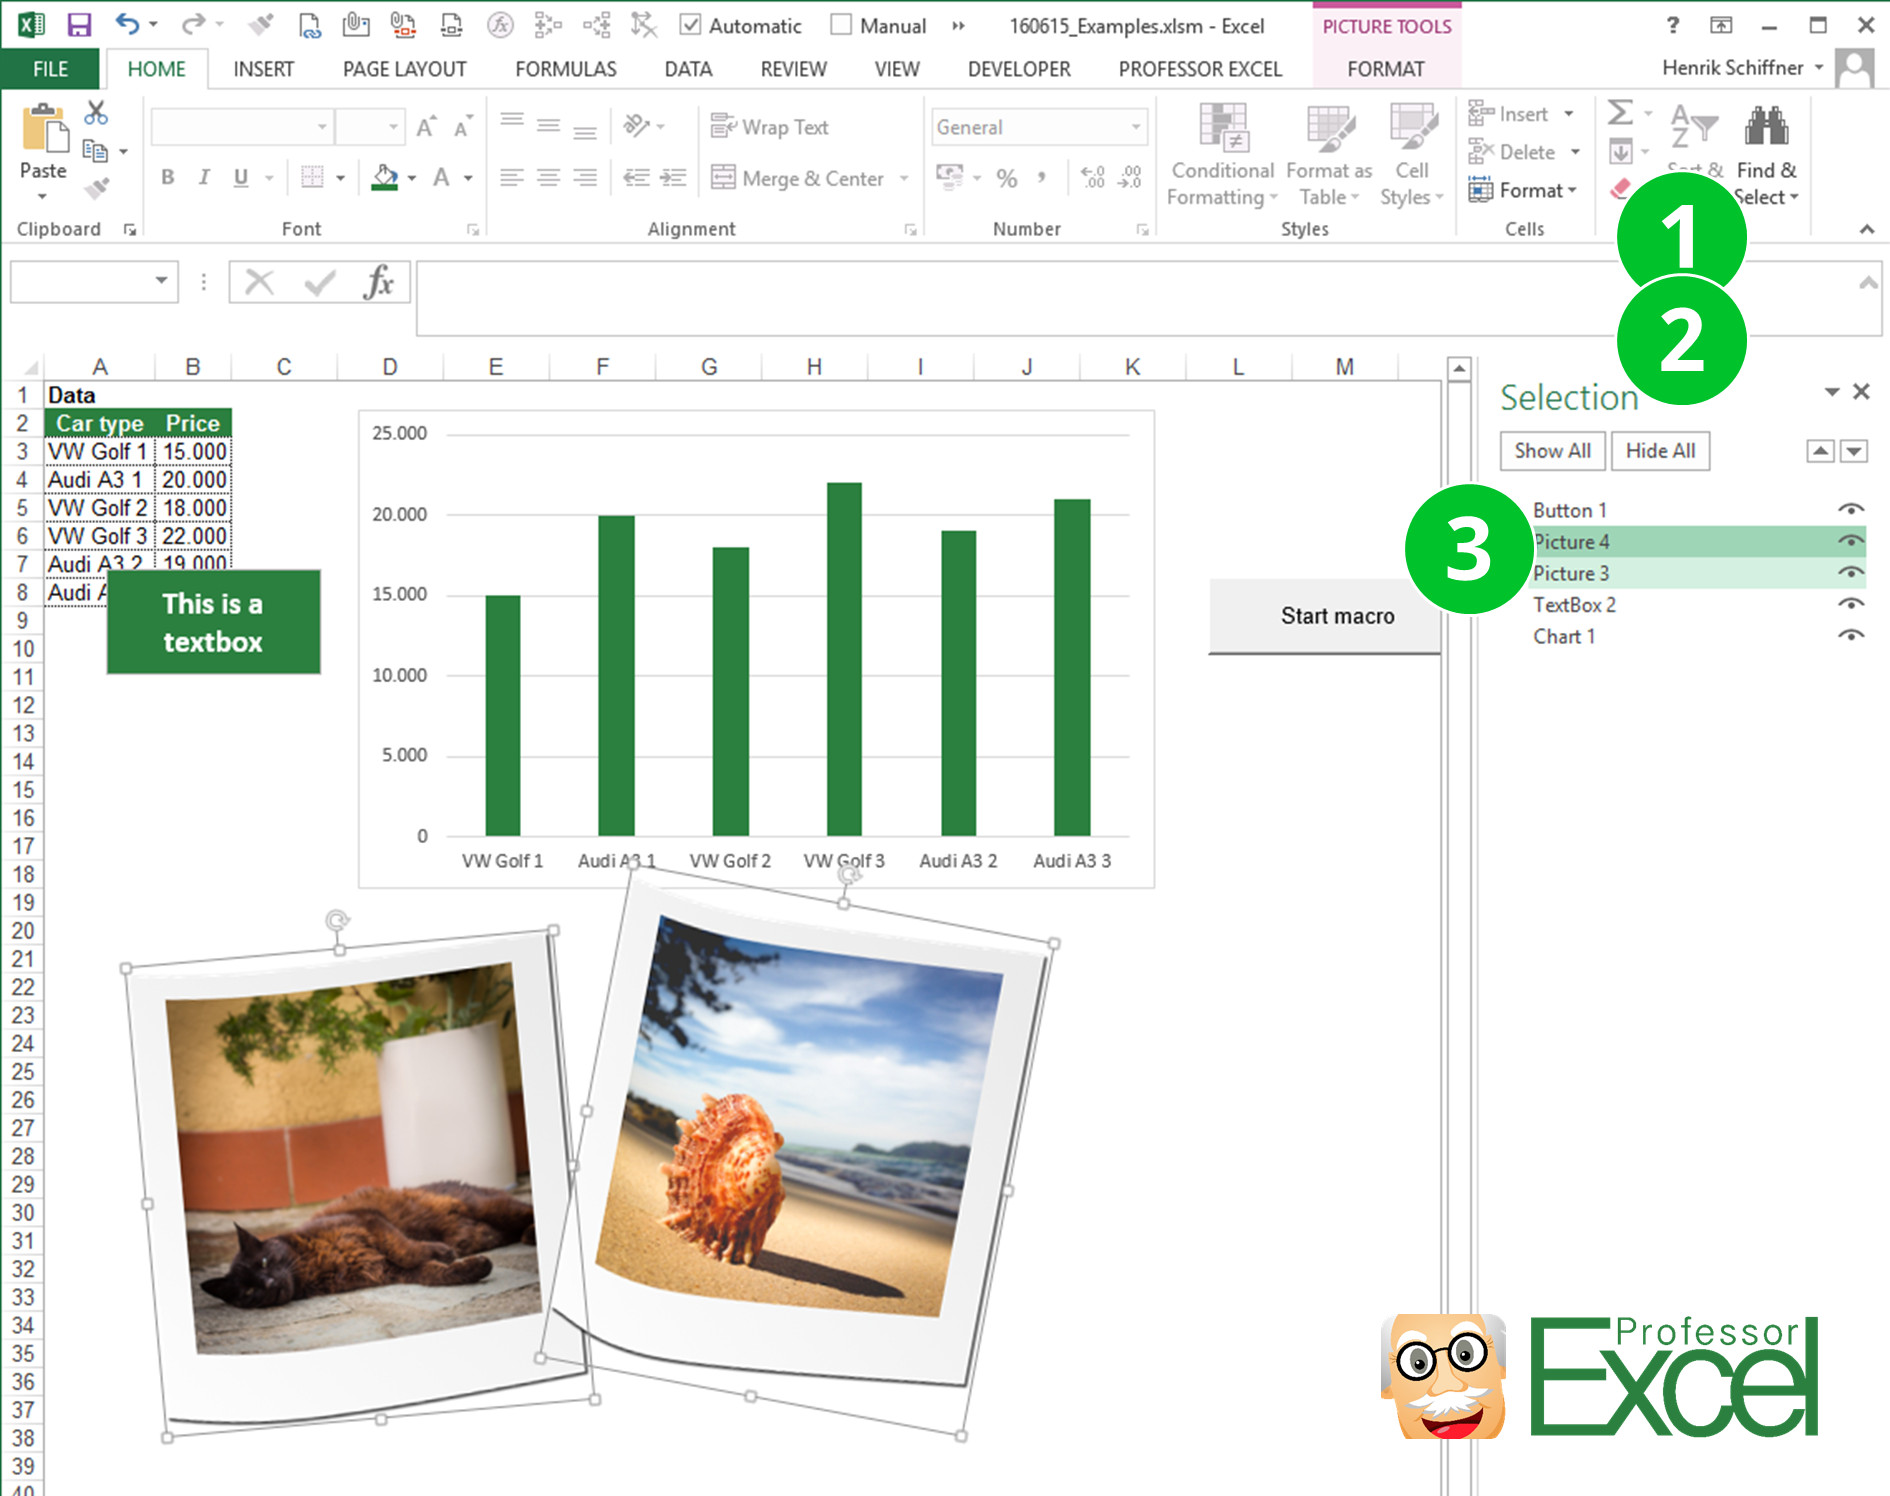 selection, pane, select, pictures, excel, images